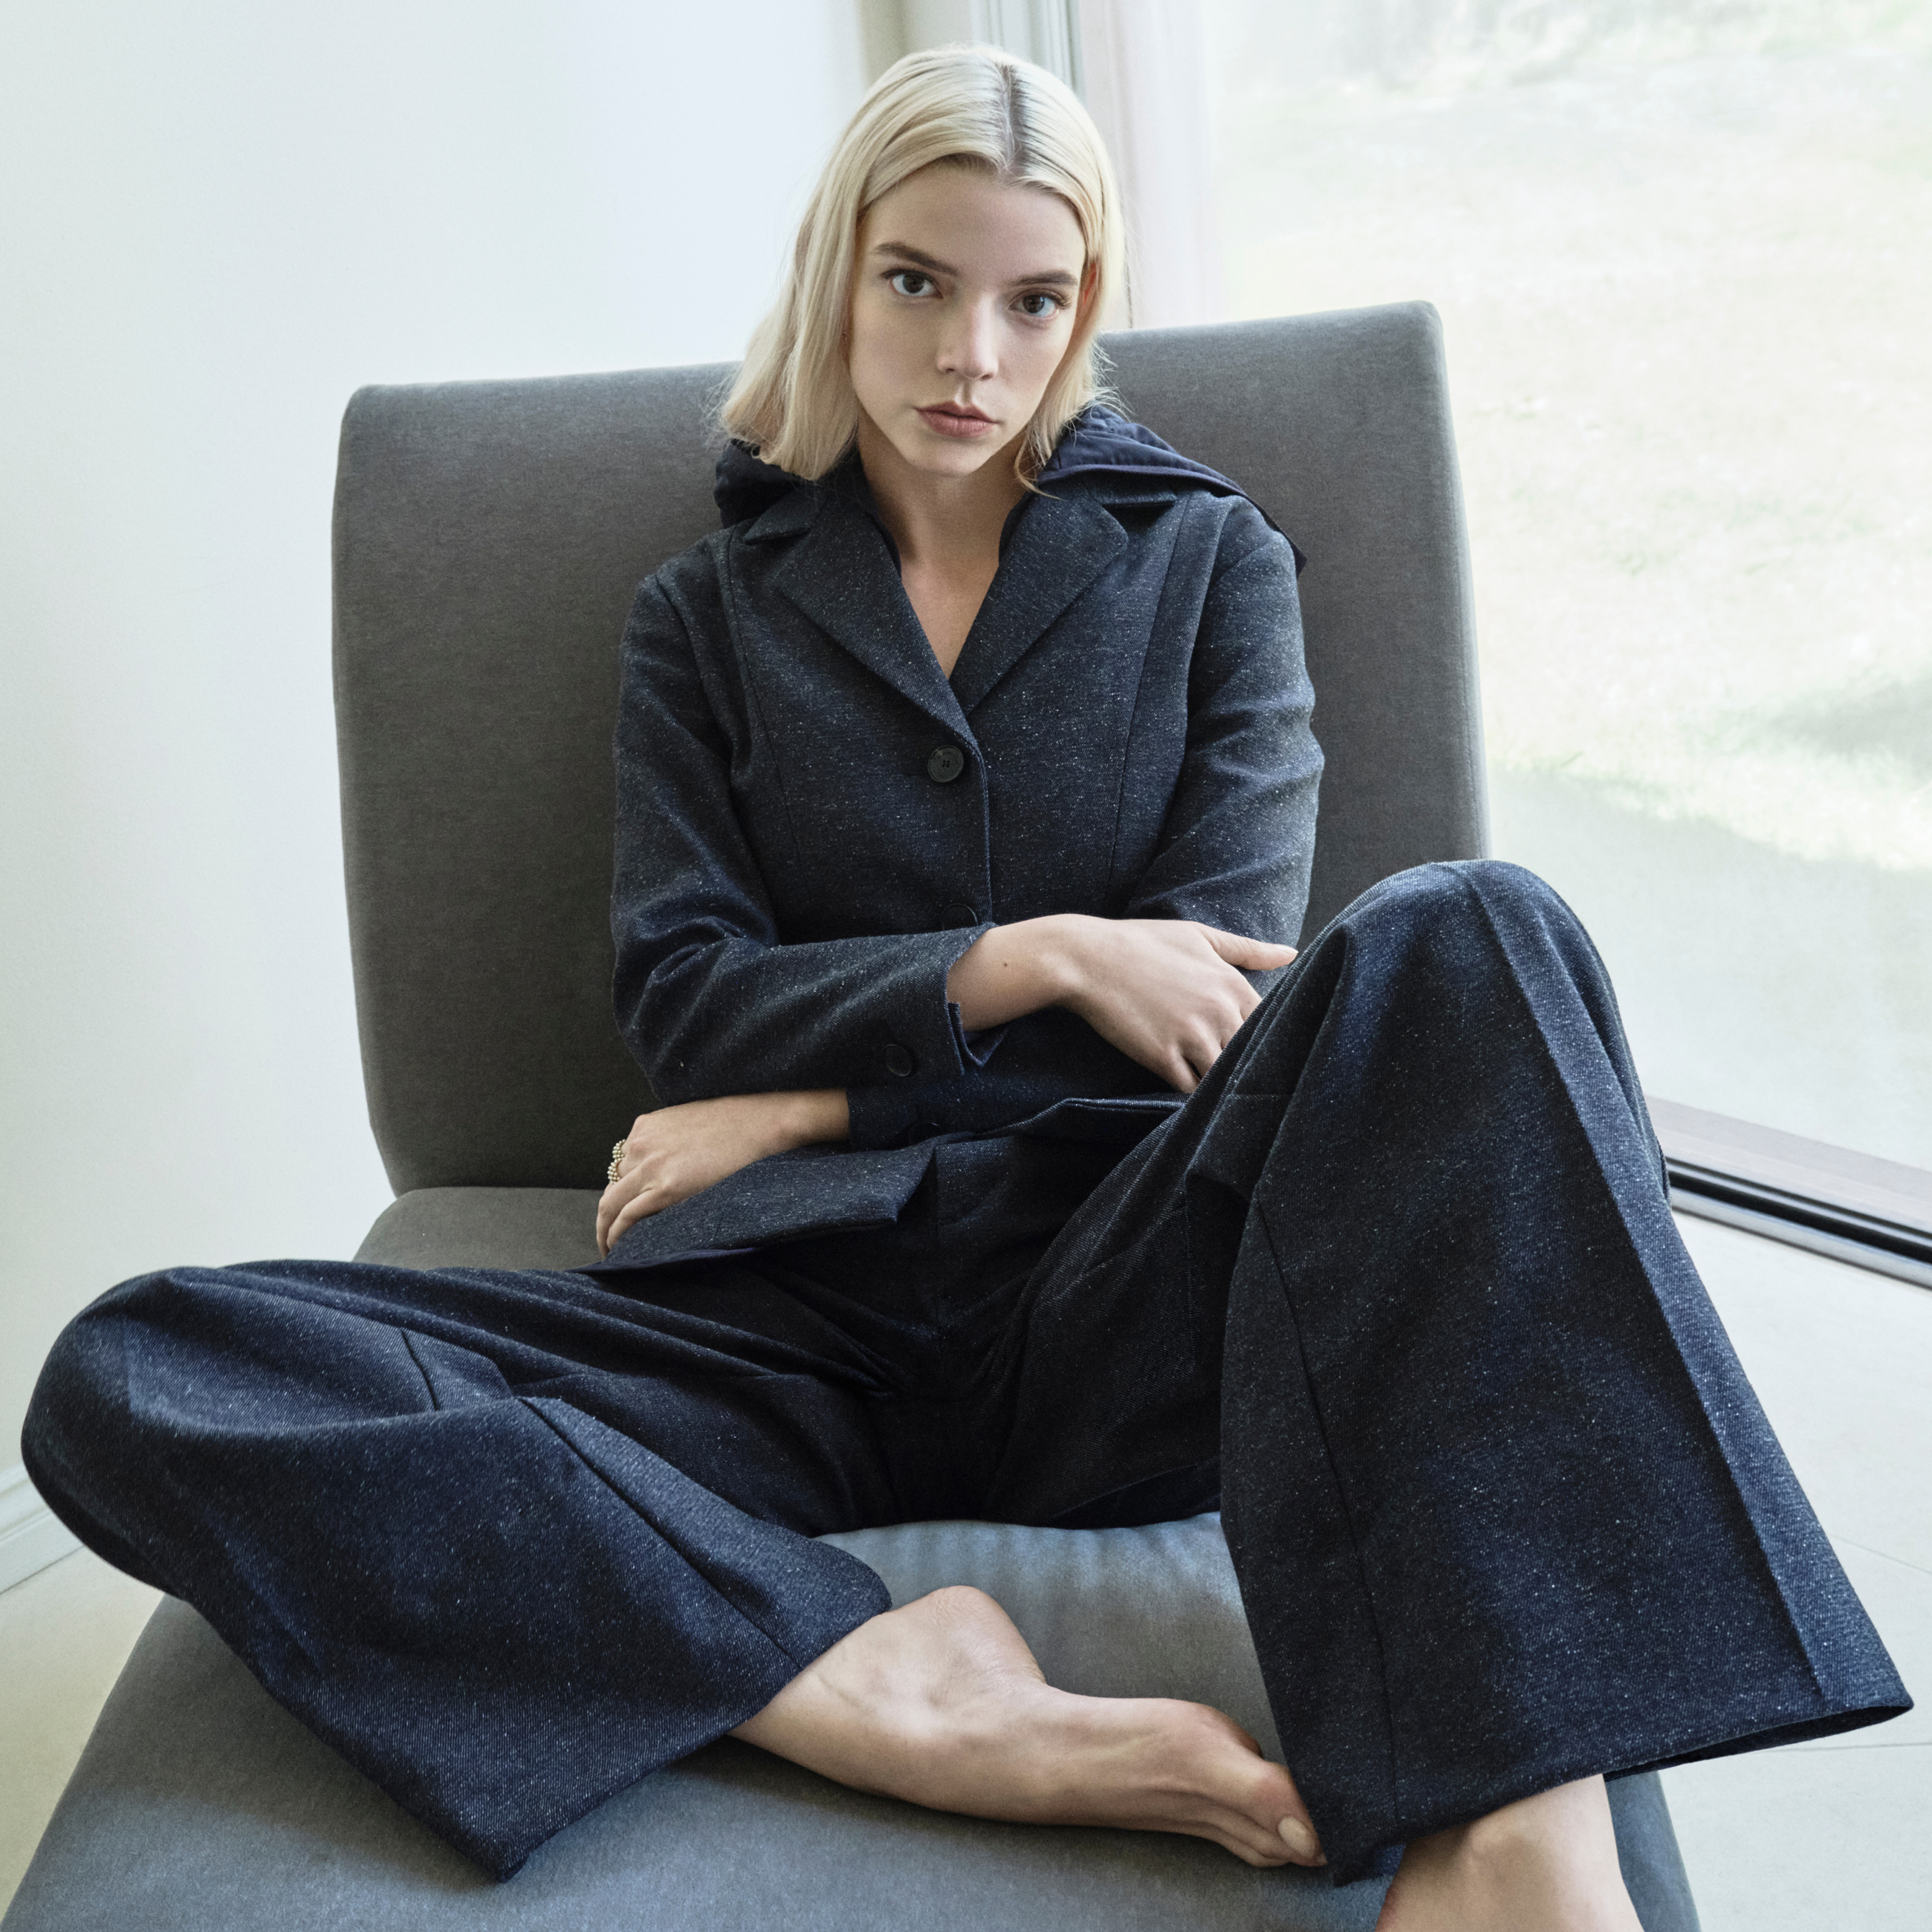 Anya Taylor Joy Actress Women Blonde Barefoot Looking At Viewer Rings Hoods Hands Crossed Lounger Ch 2600x2600